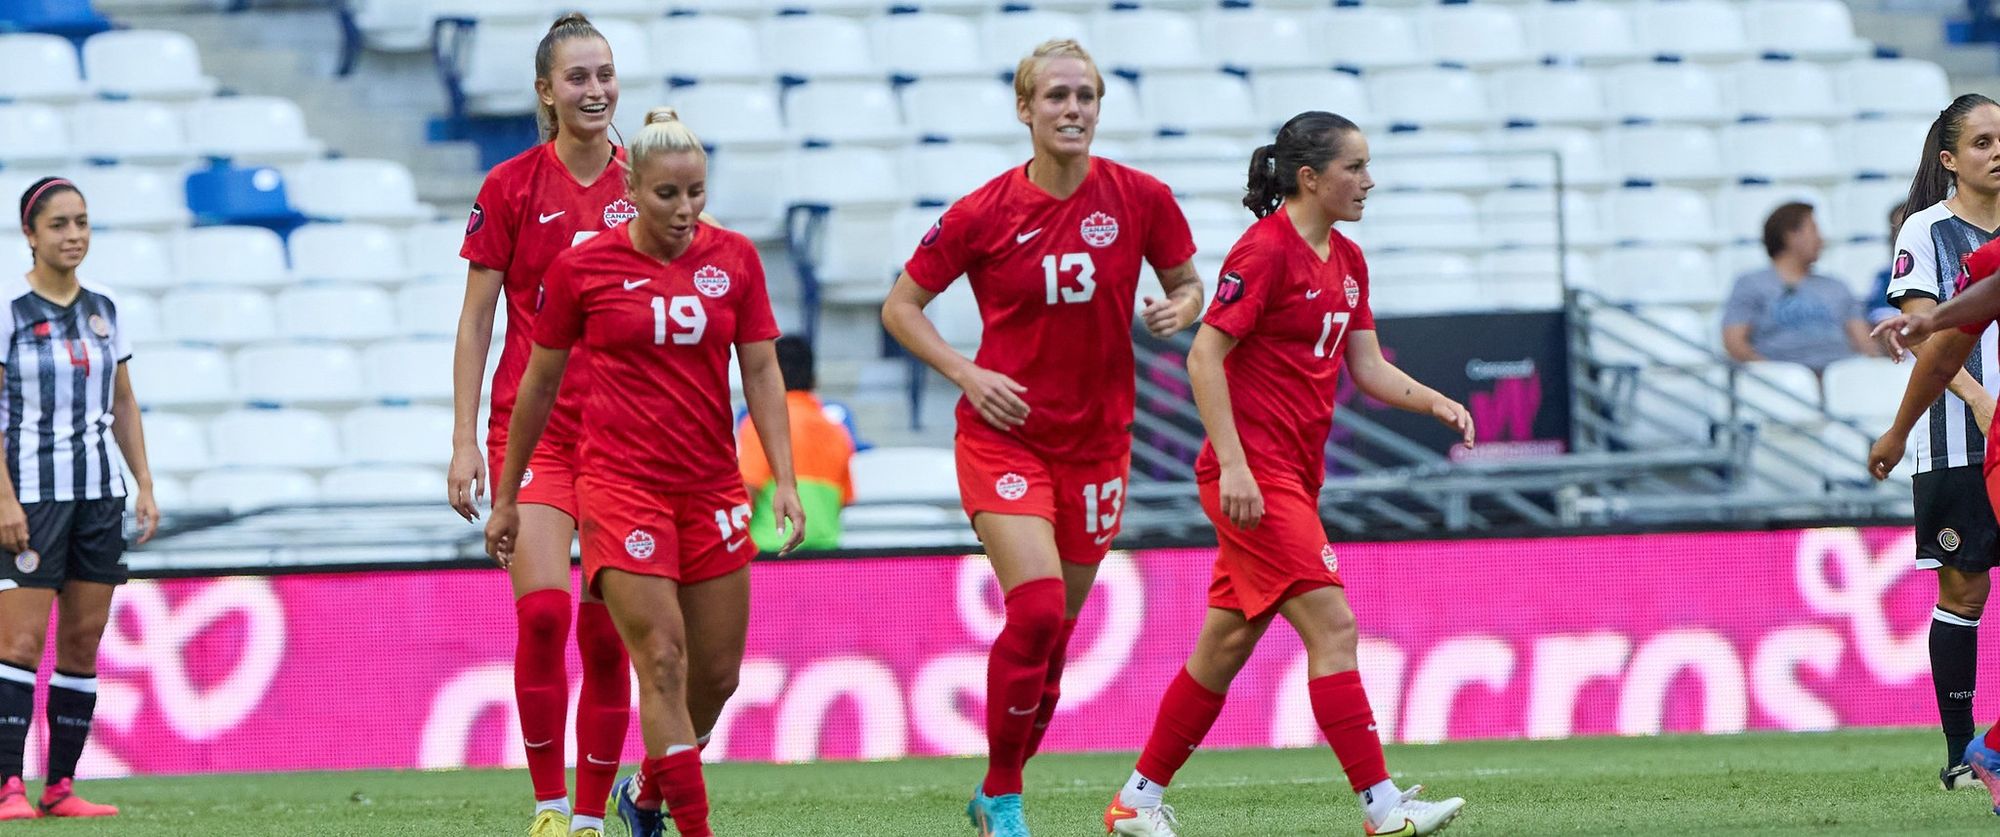 CanWNT Talk: Canada getting goals from multiple sources